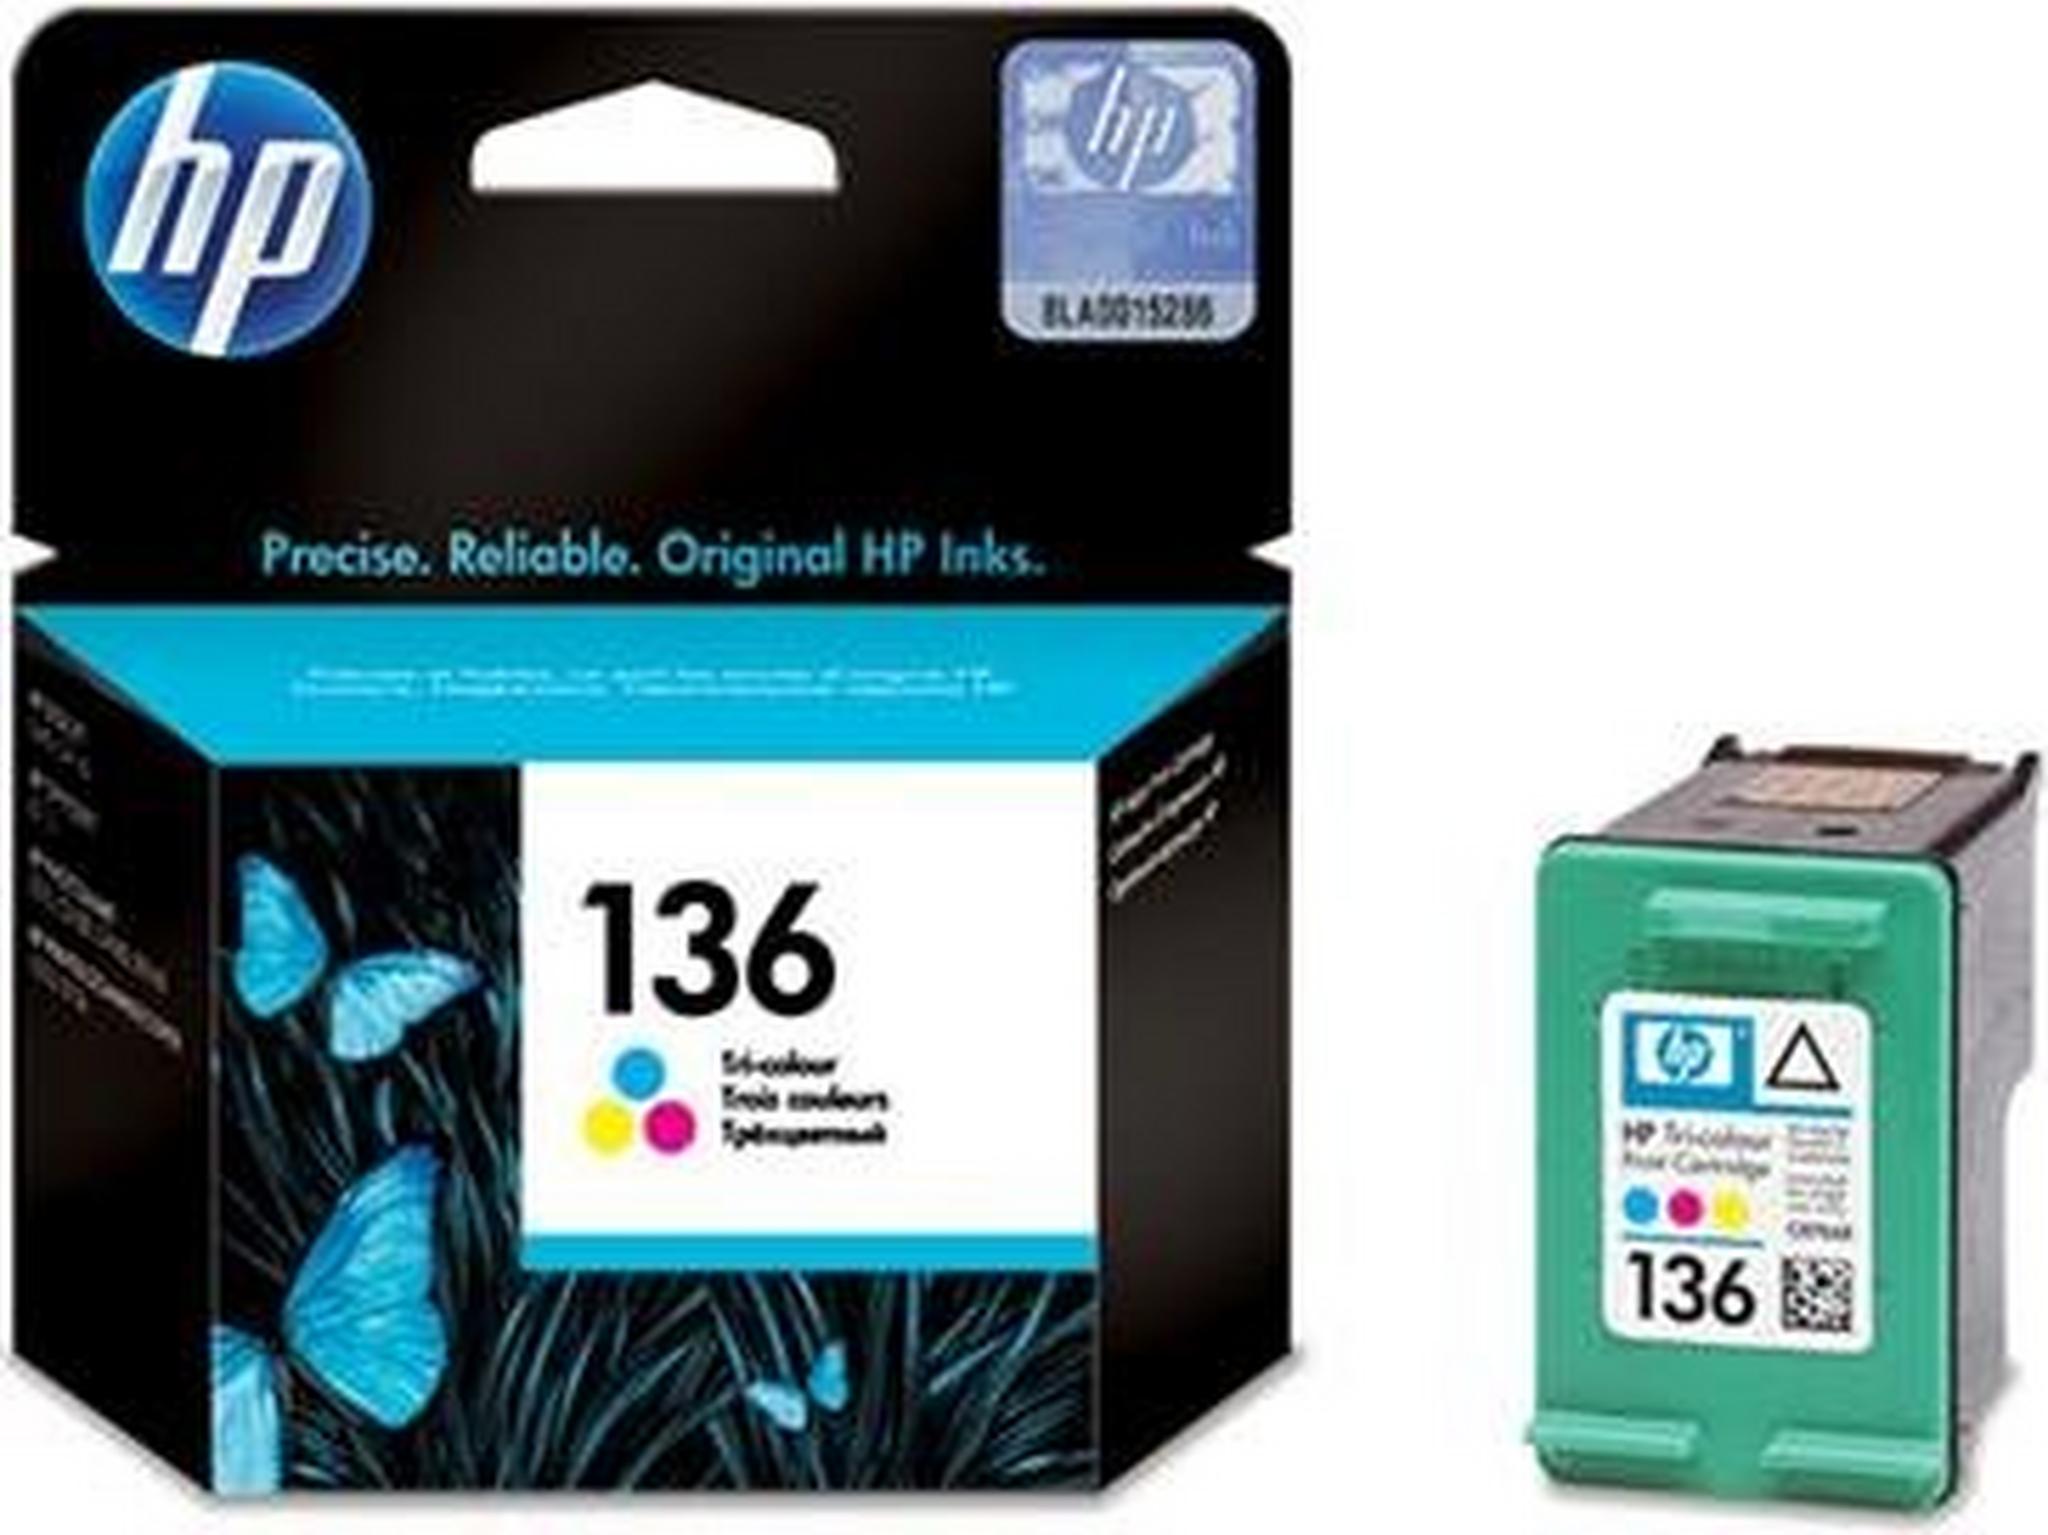 HP Ink 136 for Inkjet Printing 220 Page Yield - Tri-colour